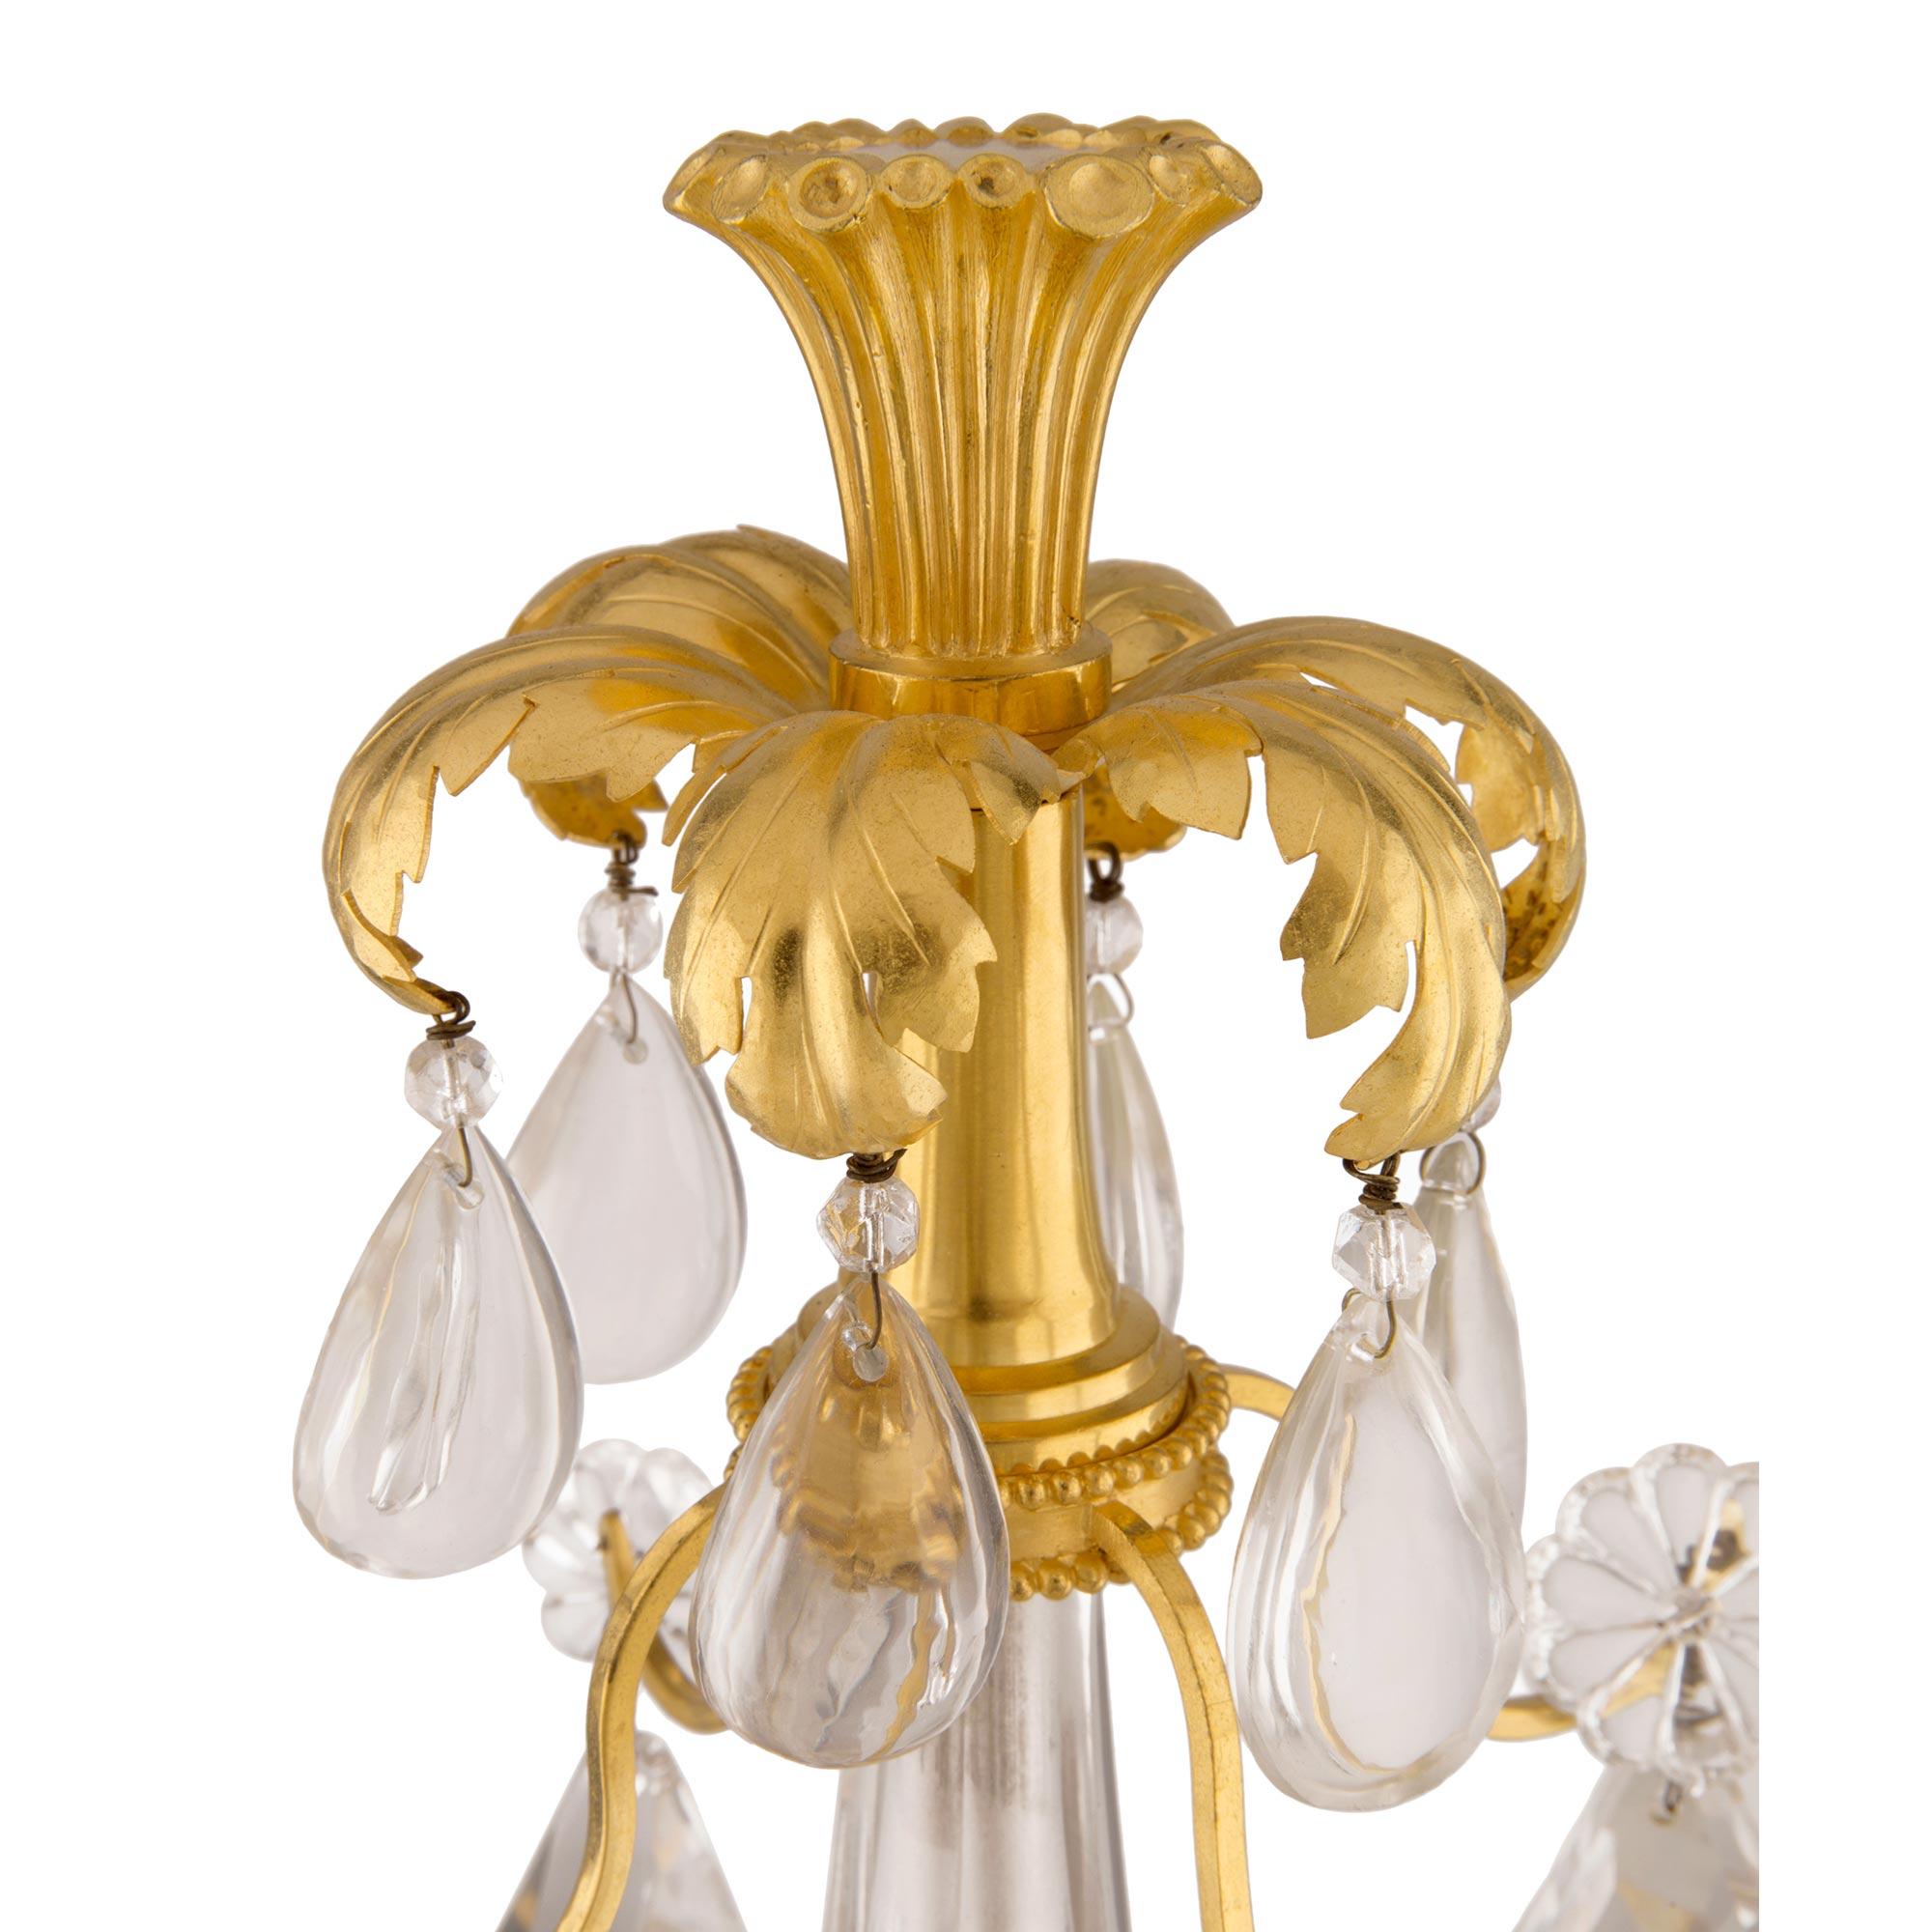 Pair of French Mid-19th Century Louis XVI Style Four-Arm Girandole Lamps In Good Condition For Sale In West Palm Beach, FL